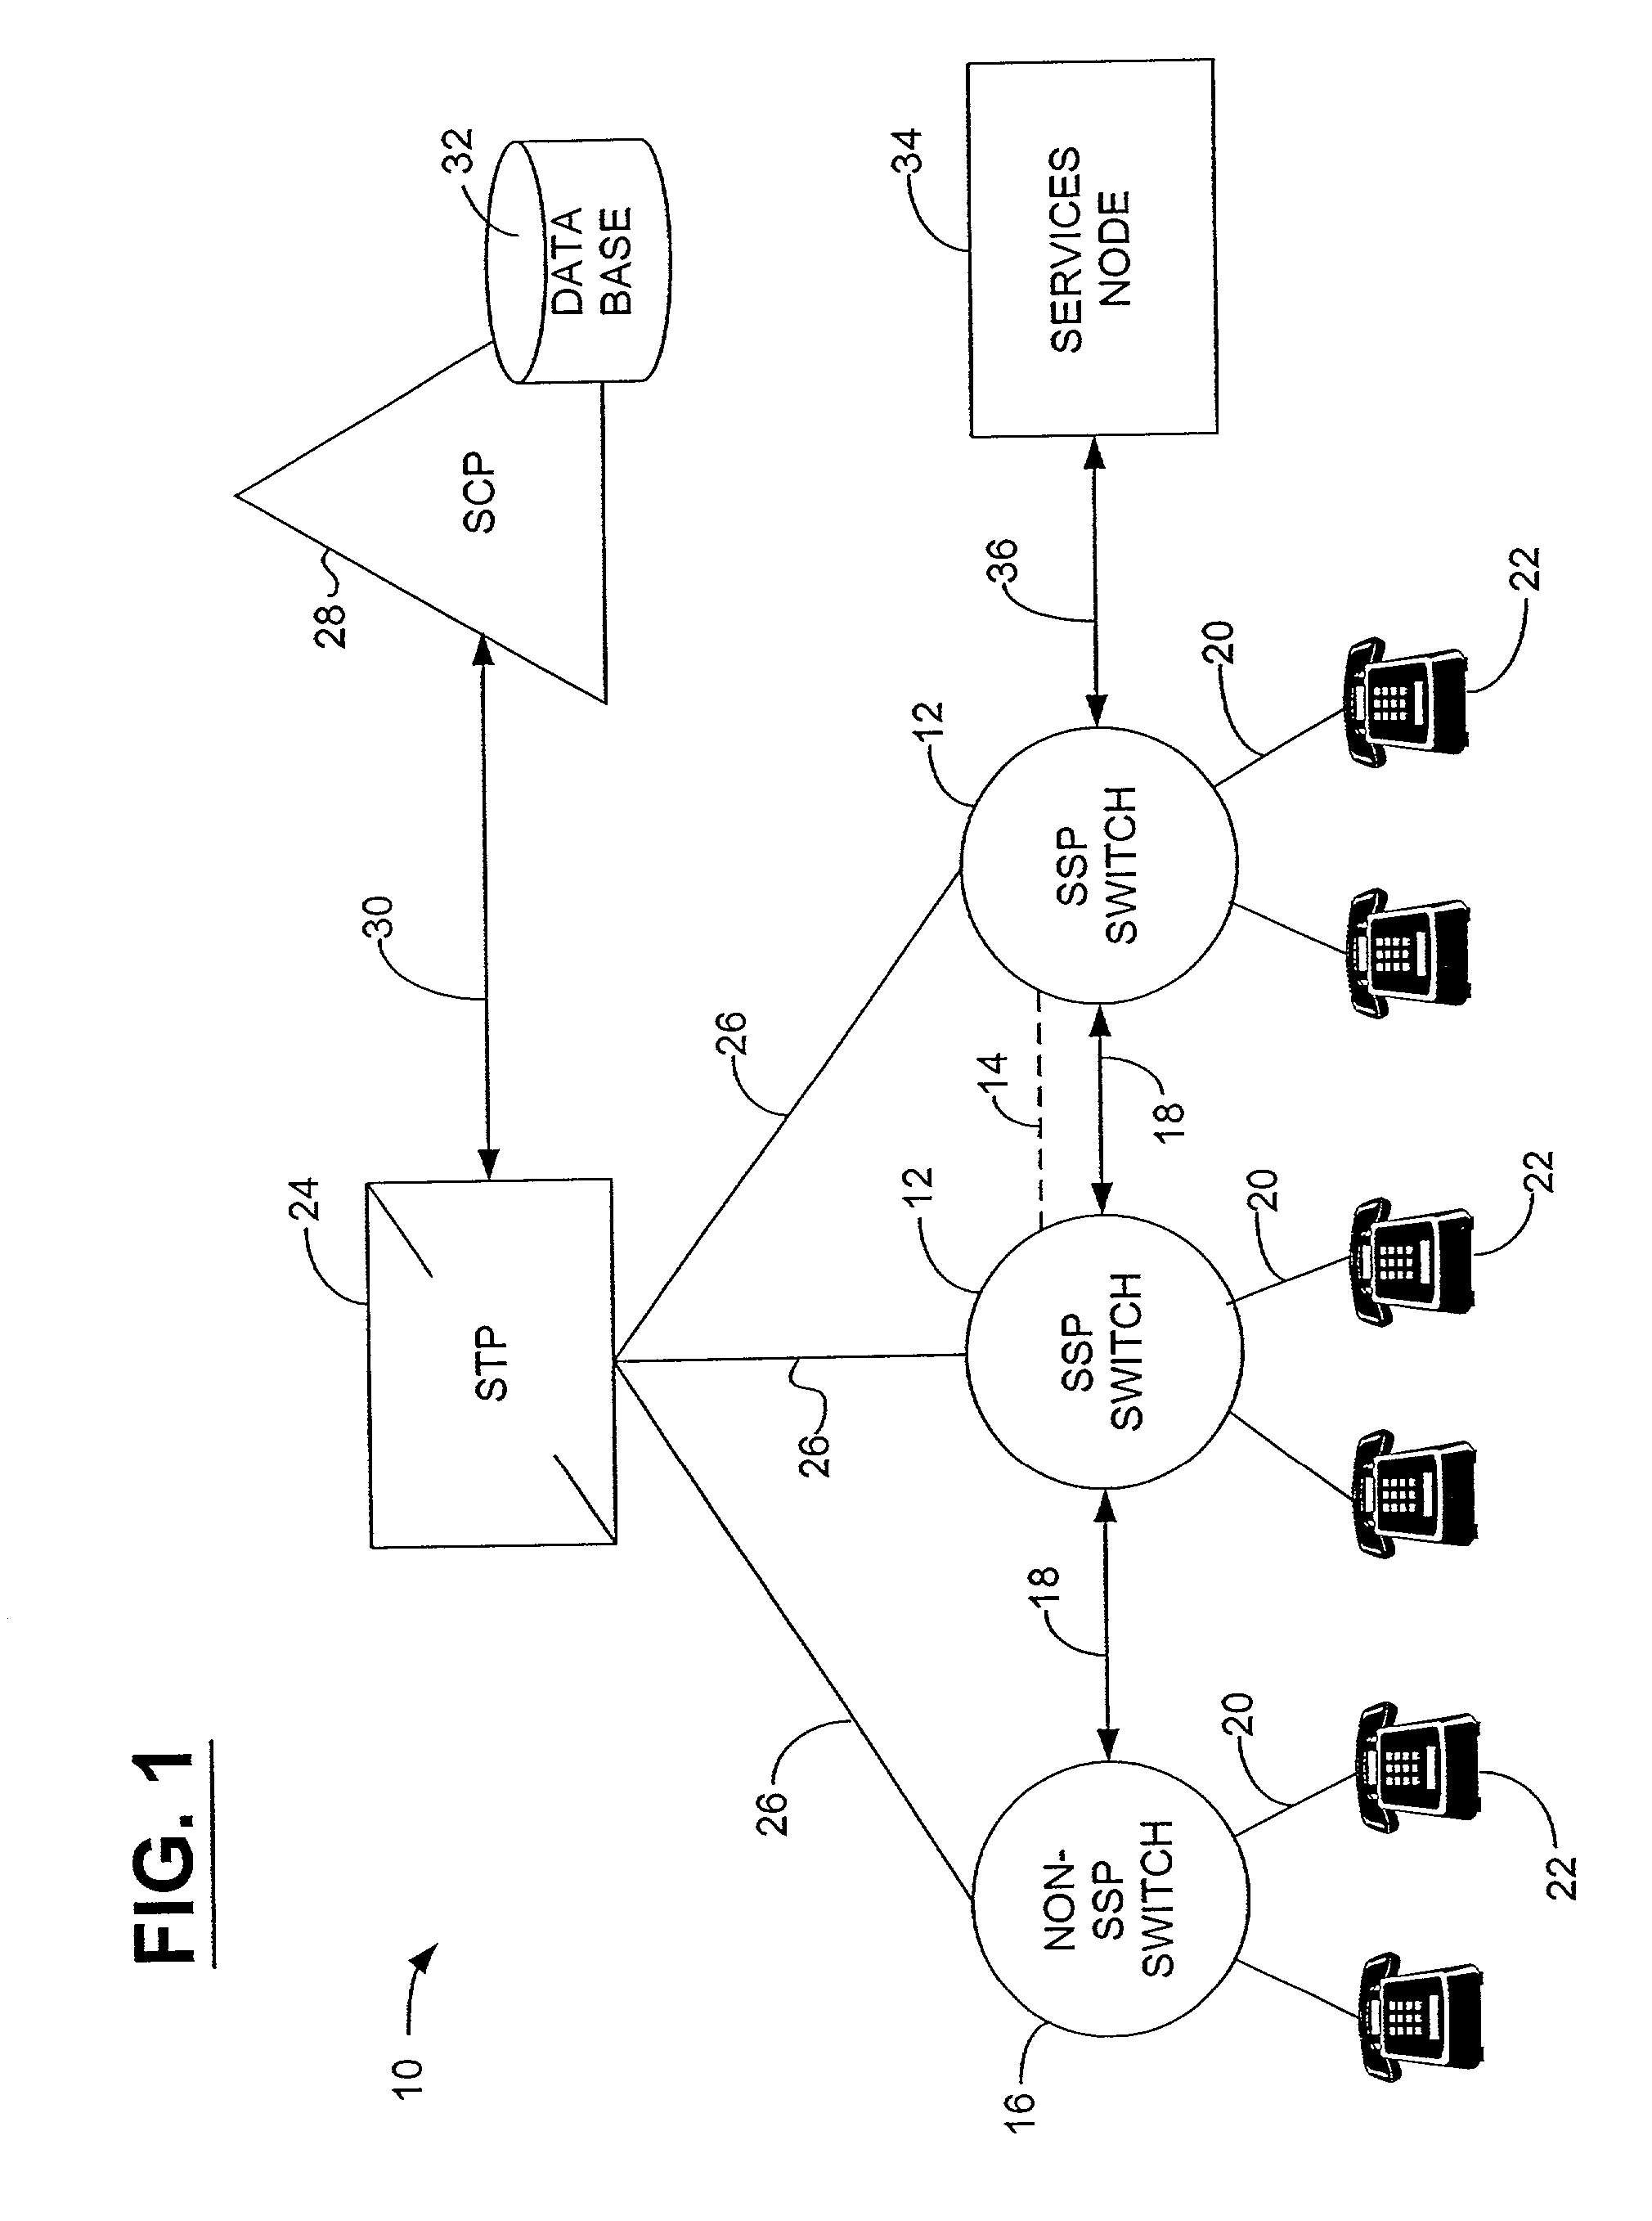 System and method for monitoring incoming communications to a telecommunications device